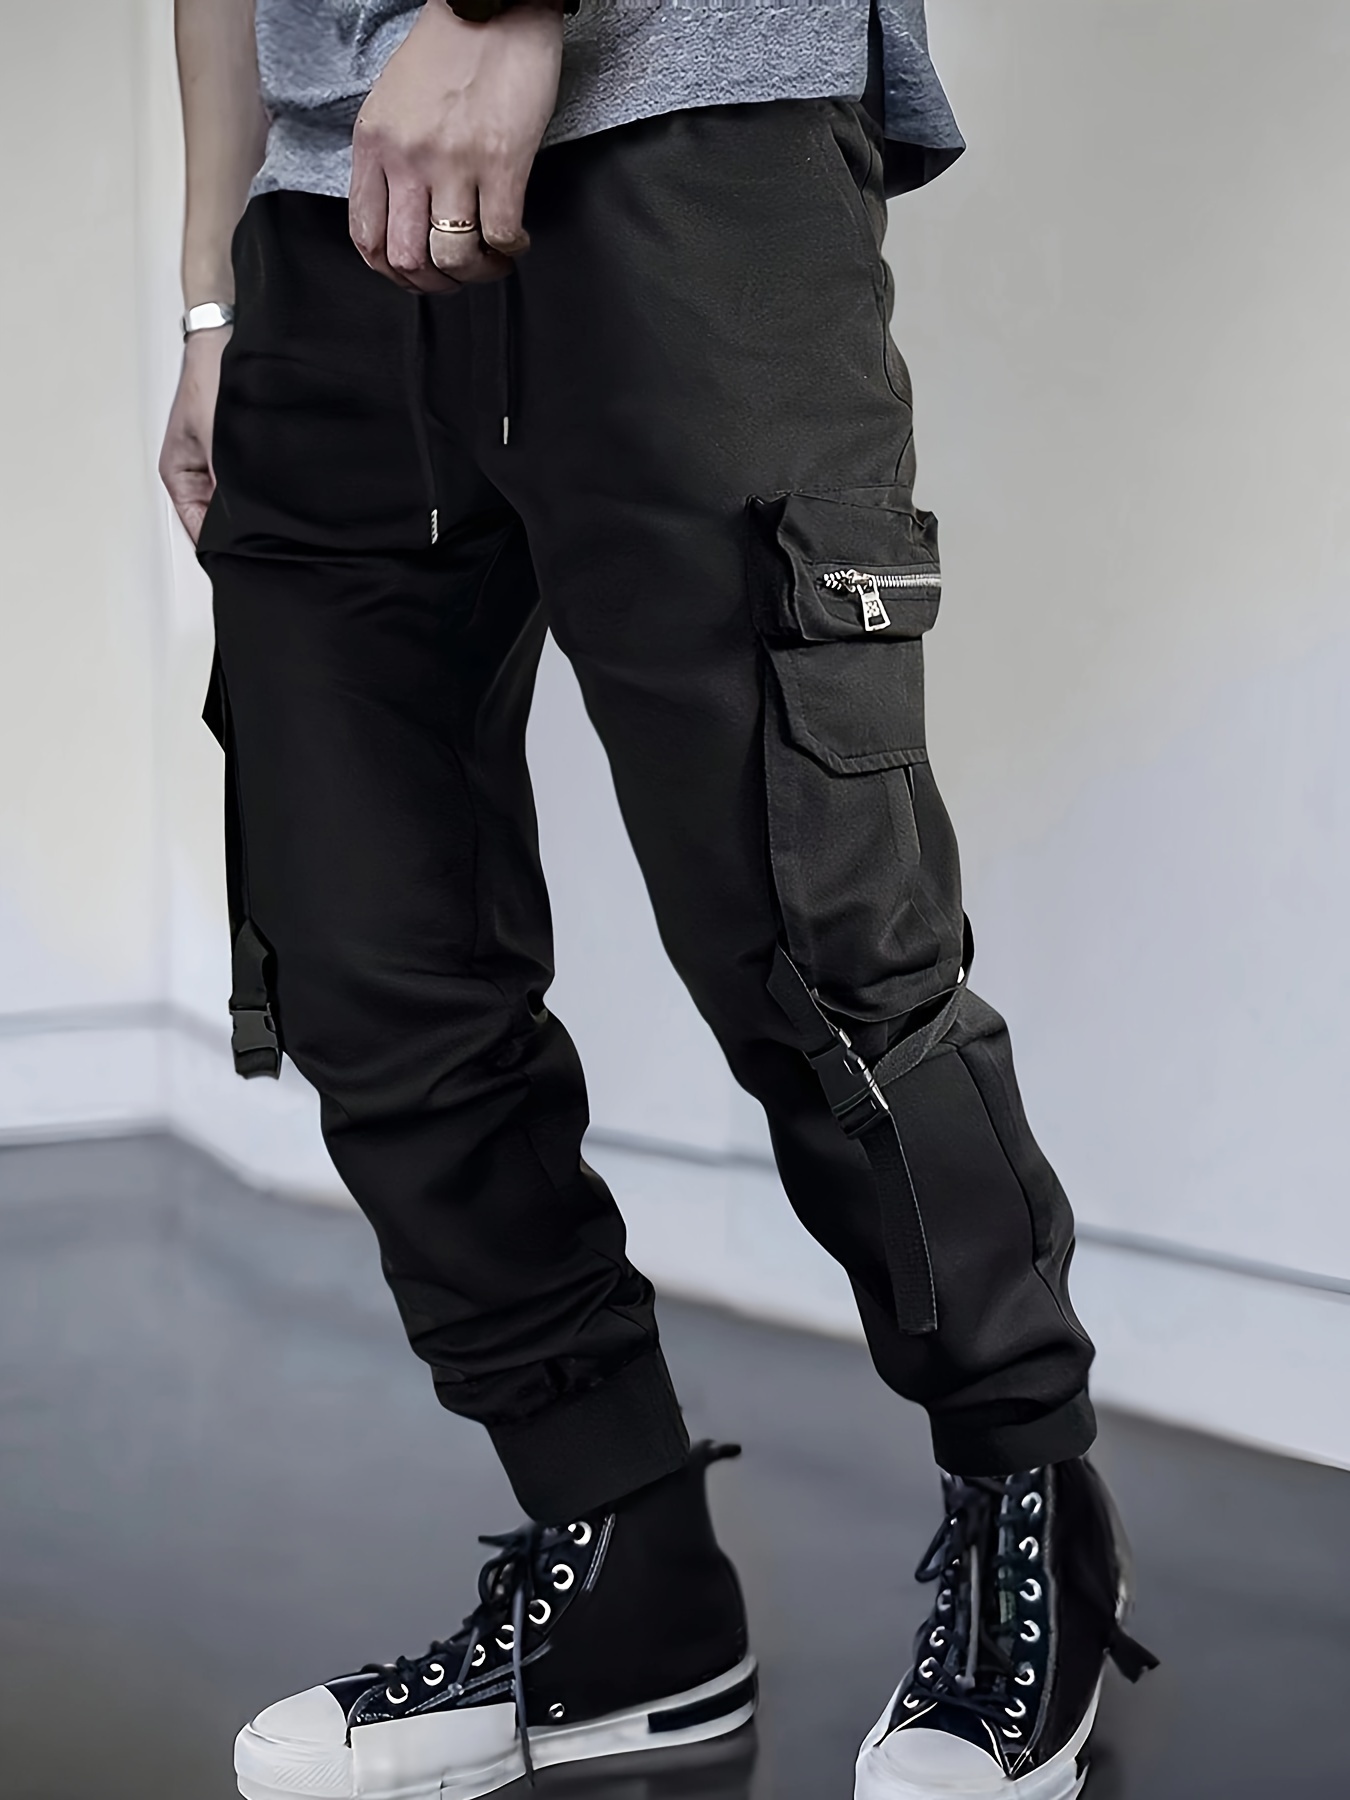 Slim Fit Cargo Pants  Slim fit cargo pants, Mens fashion casual